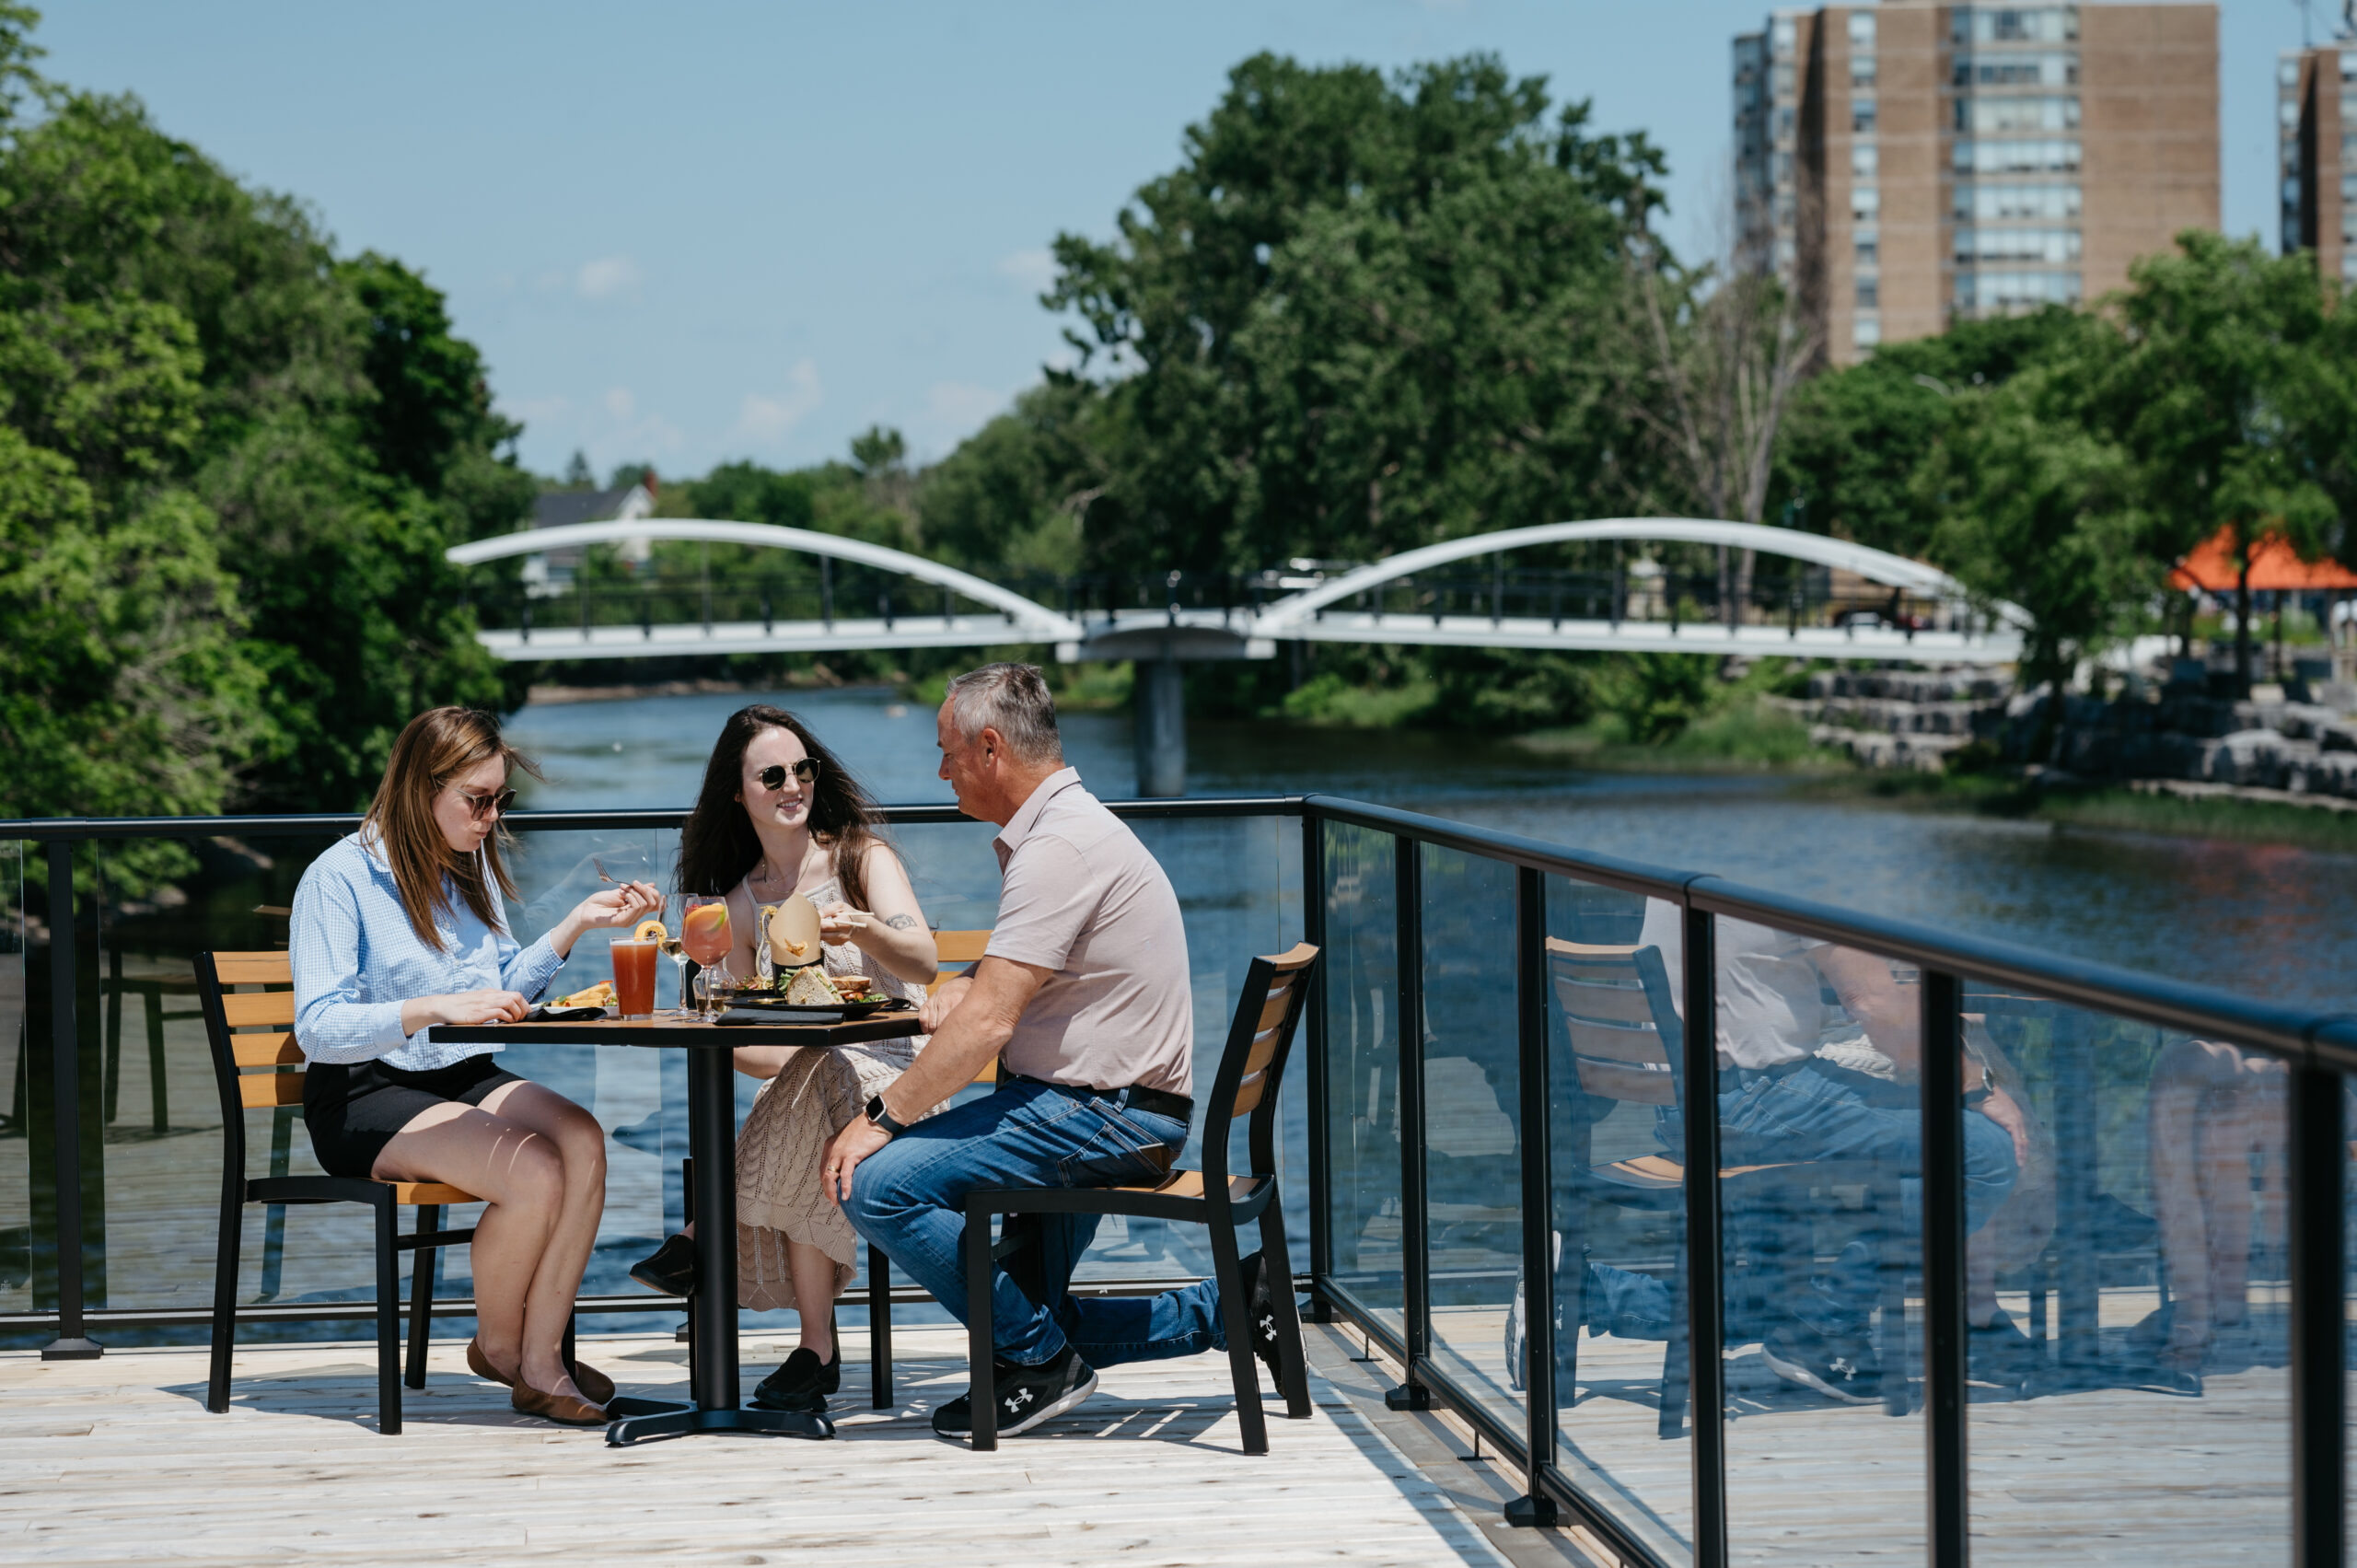 three people sitting on a patio table overlooking a river, a pedestrian crossing bridge in the background